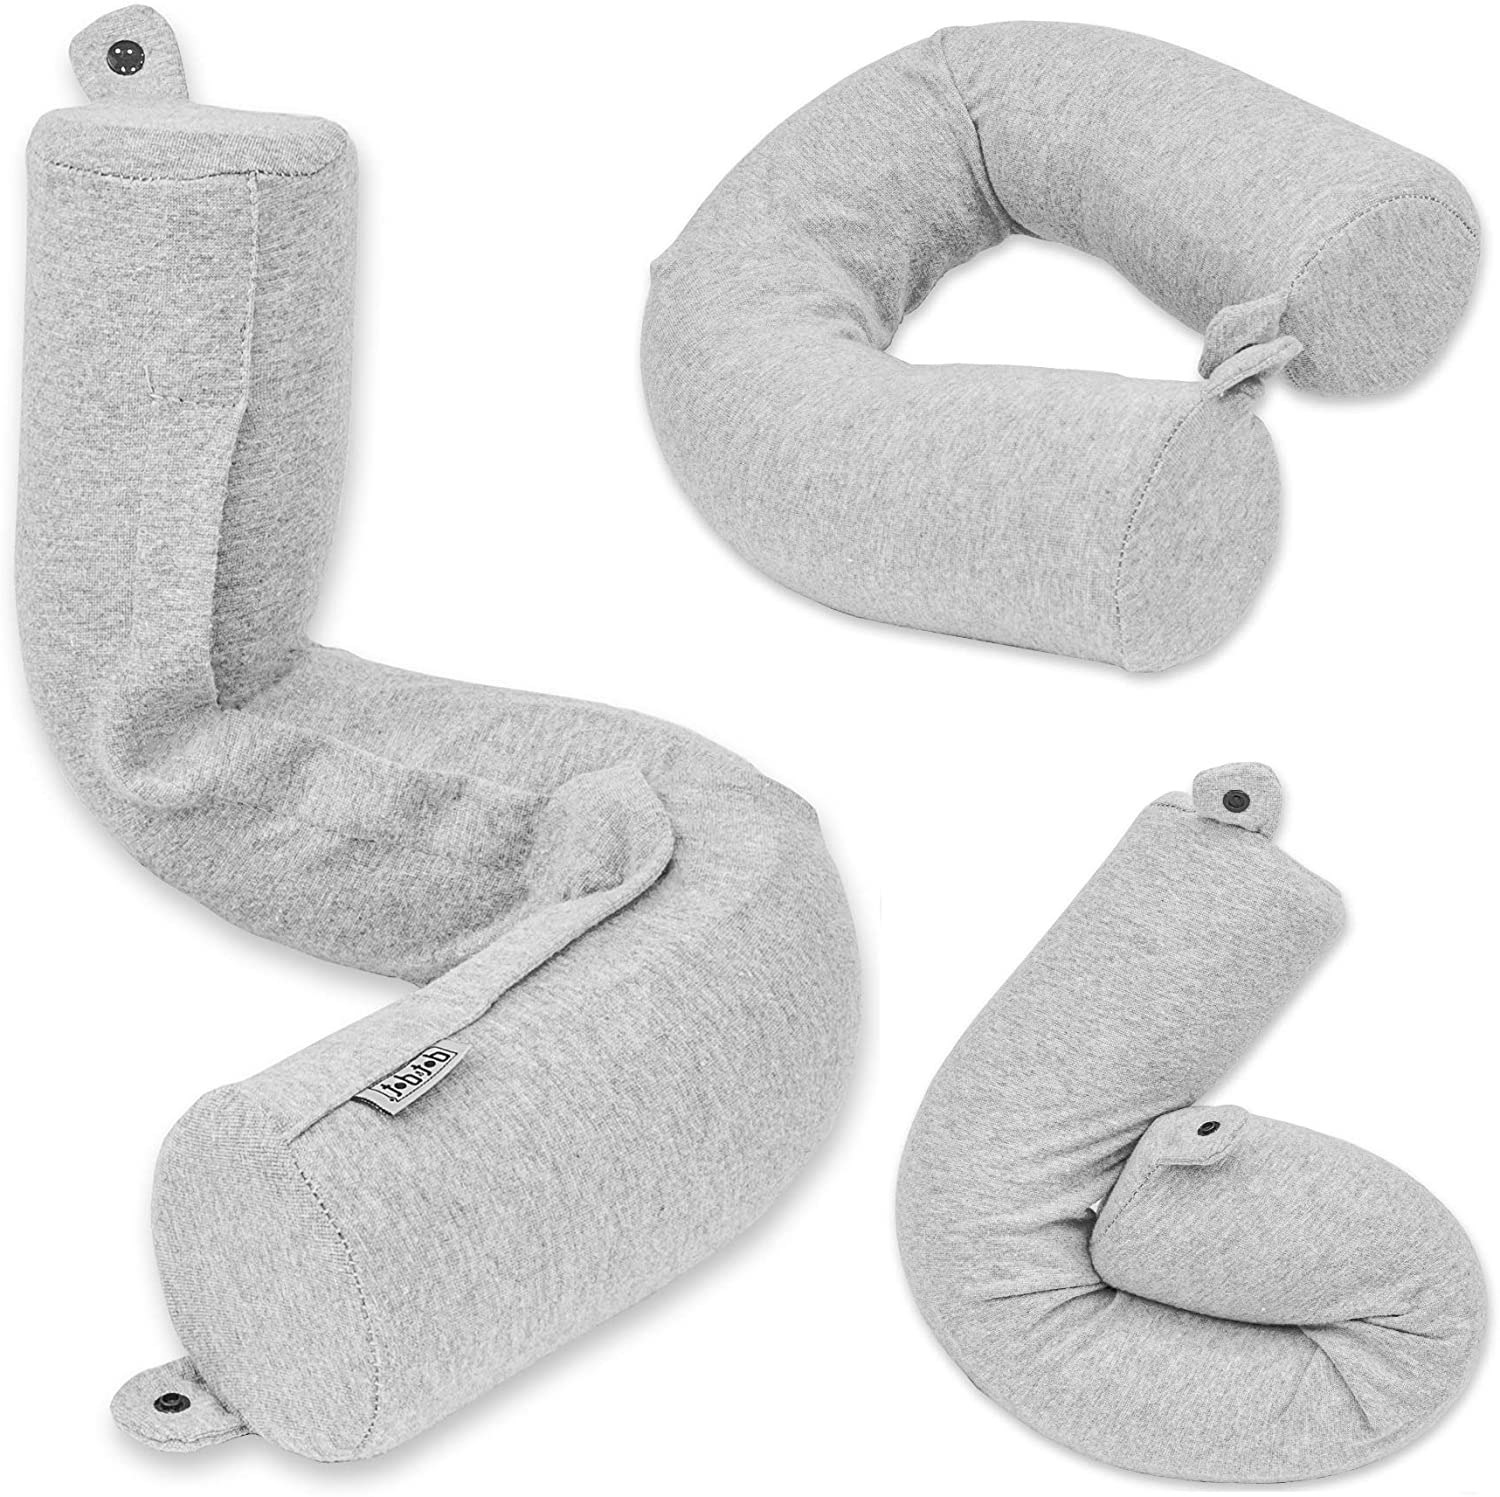 BCOZZY Neck Pillow for Travel Provides Double Support to The Head, Neck,  and Chin in Any Sleeping Position on Flights, Car, and at Home, Comfortable Airplane  Travel Pillow, Large, Navy - Yahoo